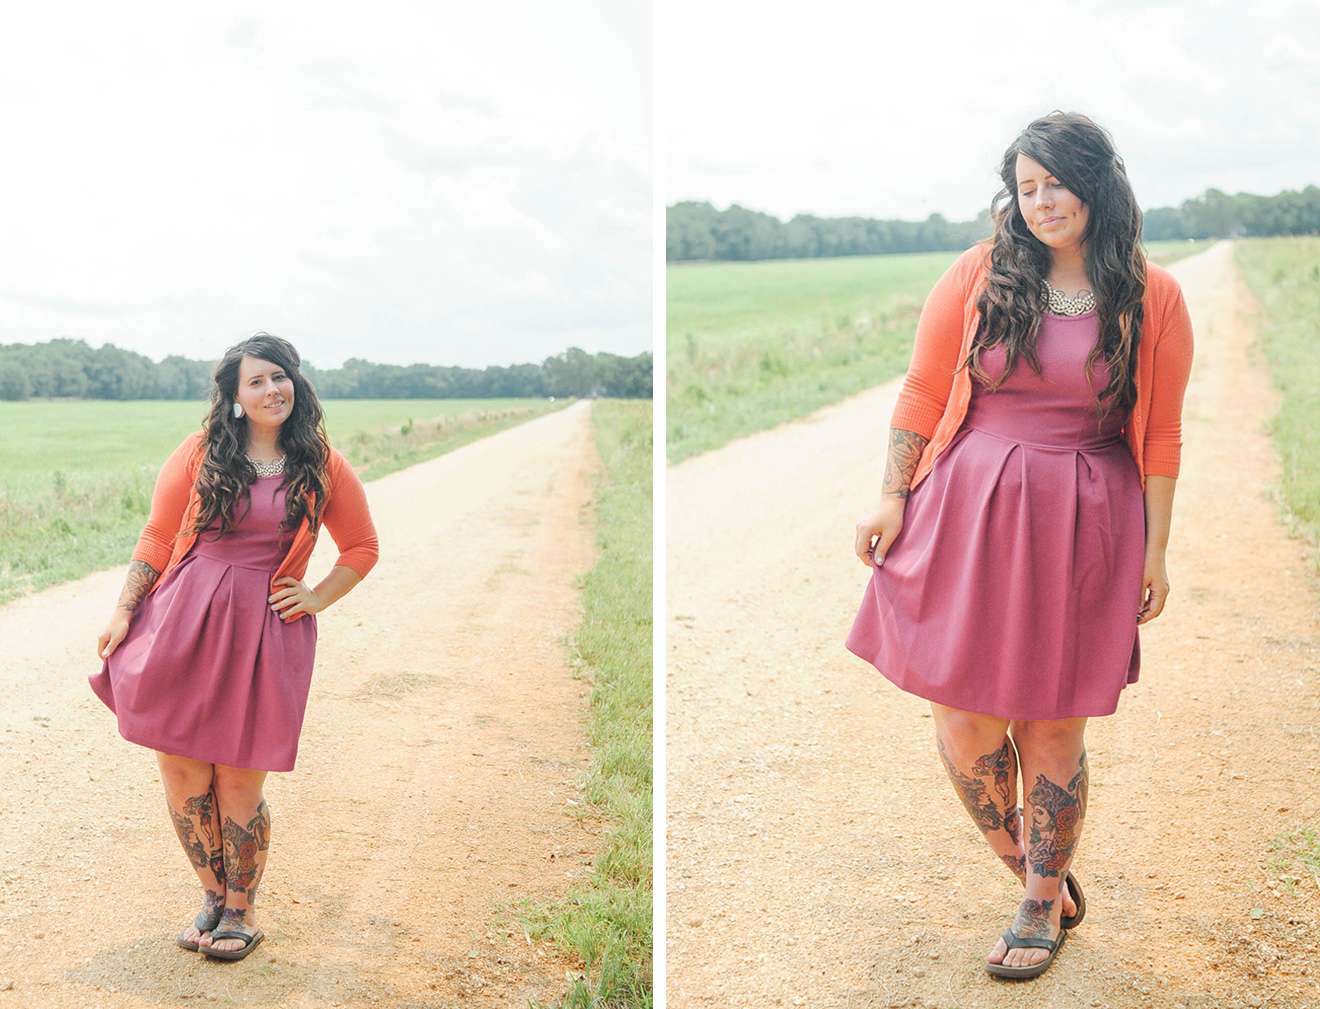 Stitch Fix - This Charming Life by Kaelah Bee